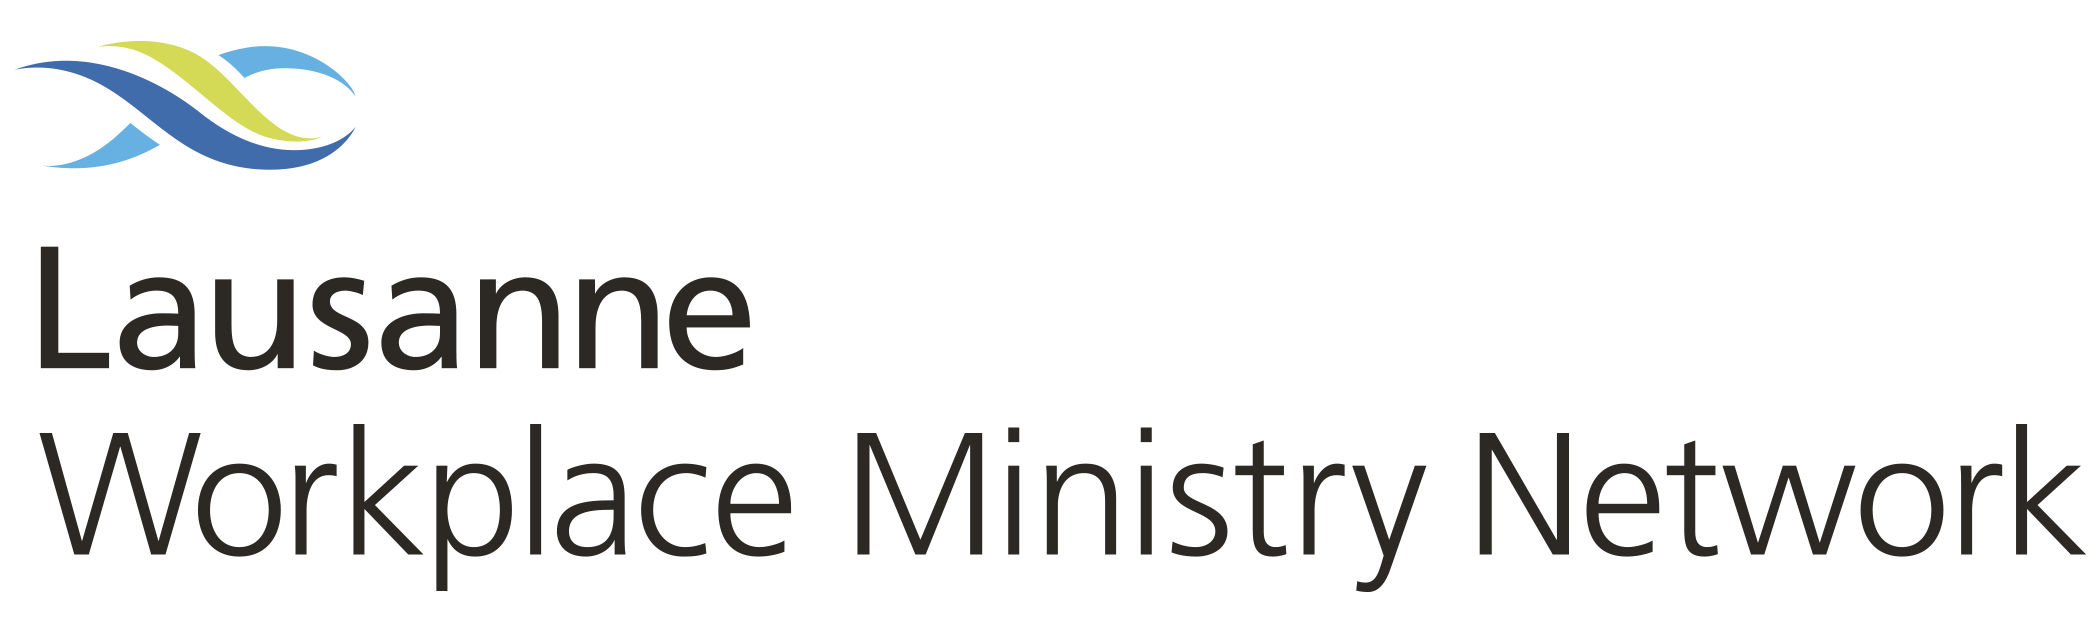 Workplace Ministry Network (small).png